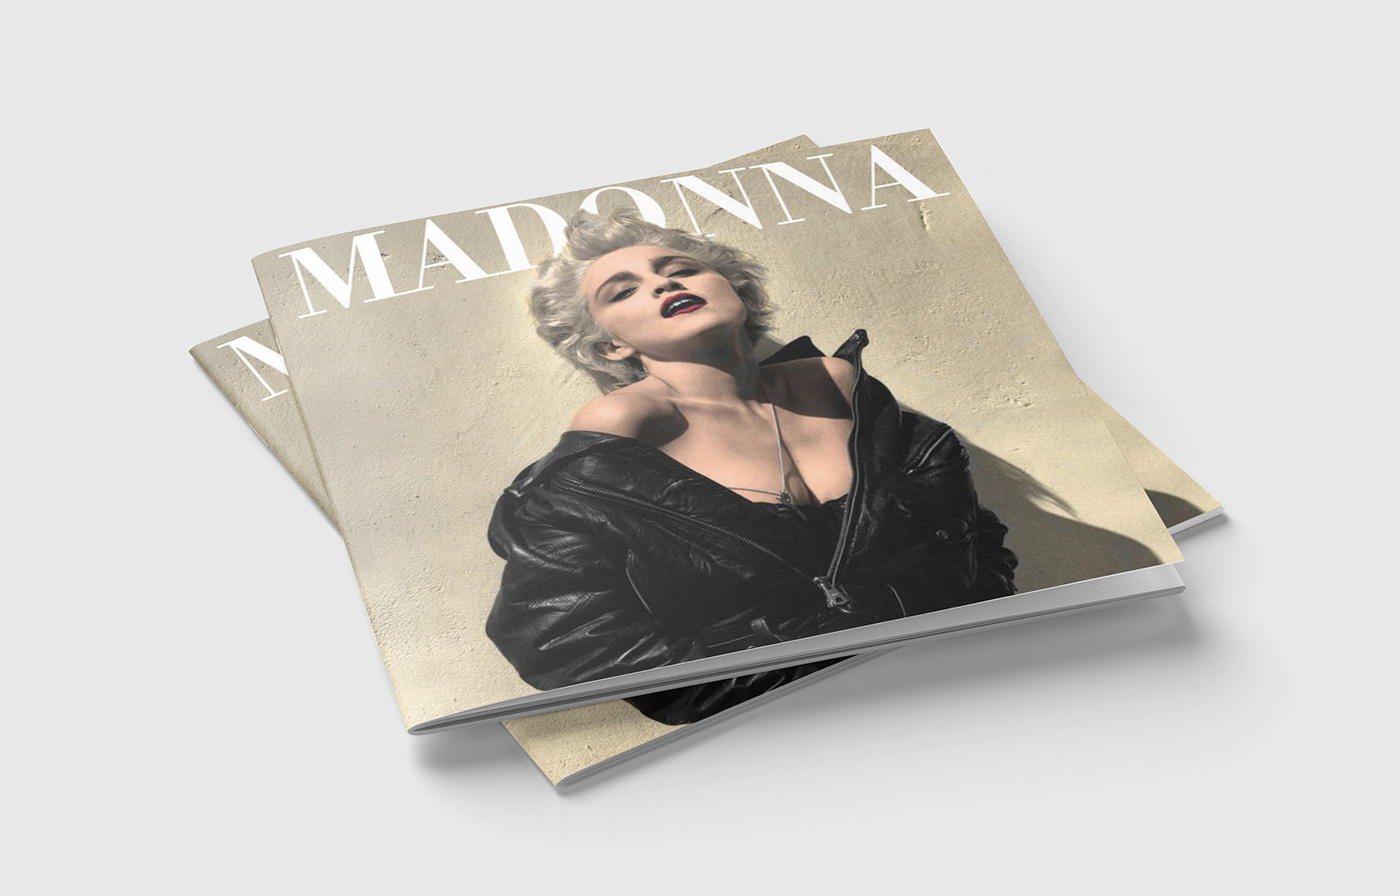 COFFEE TABLE BOOK madonna publication InDesign photoshop graphic design  square book visuals book